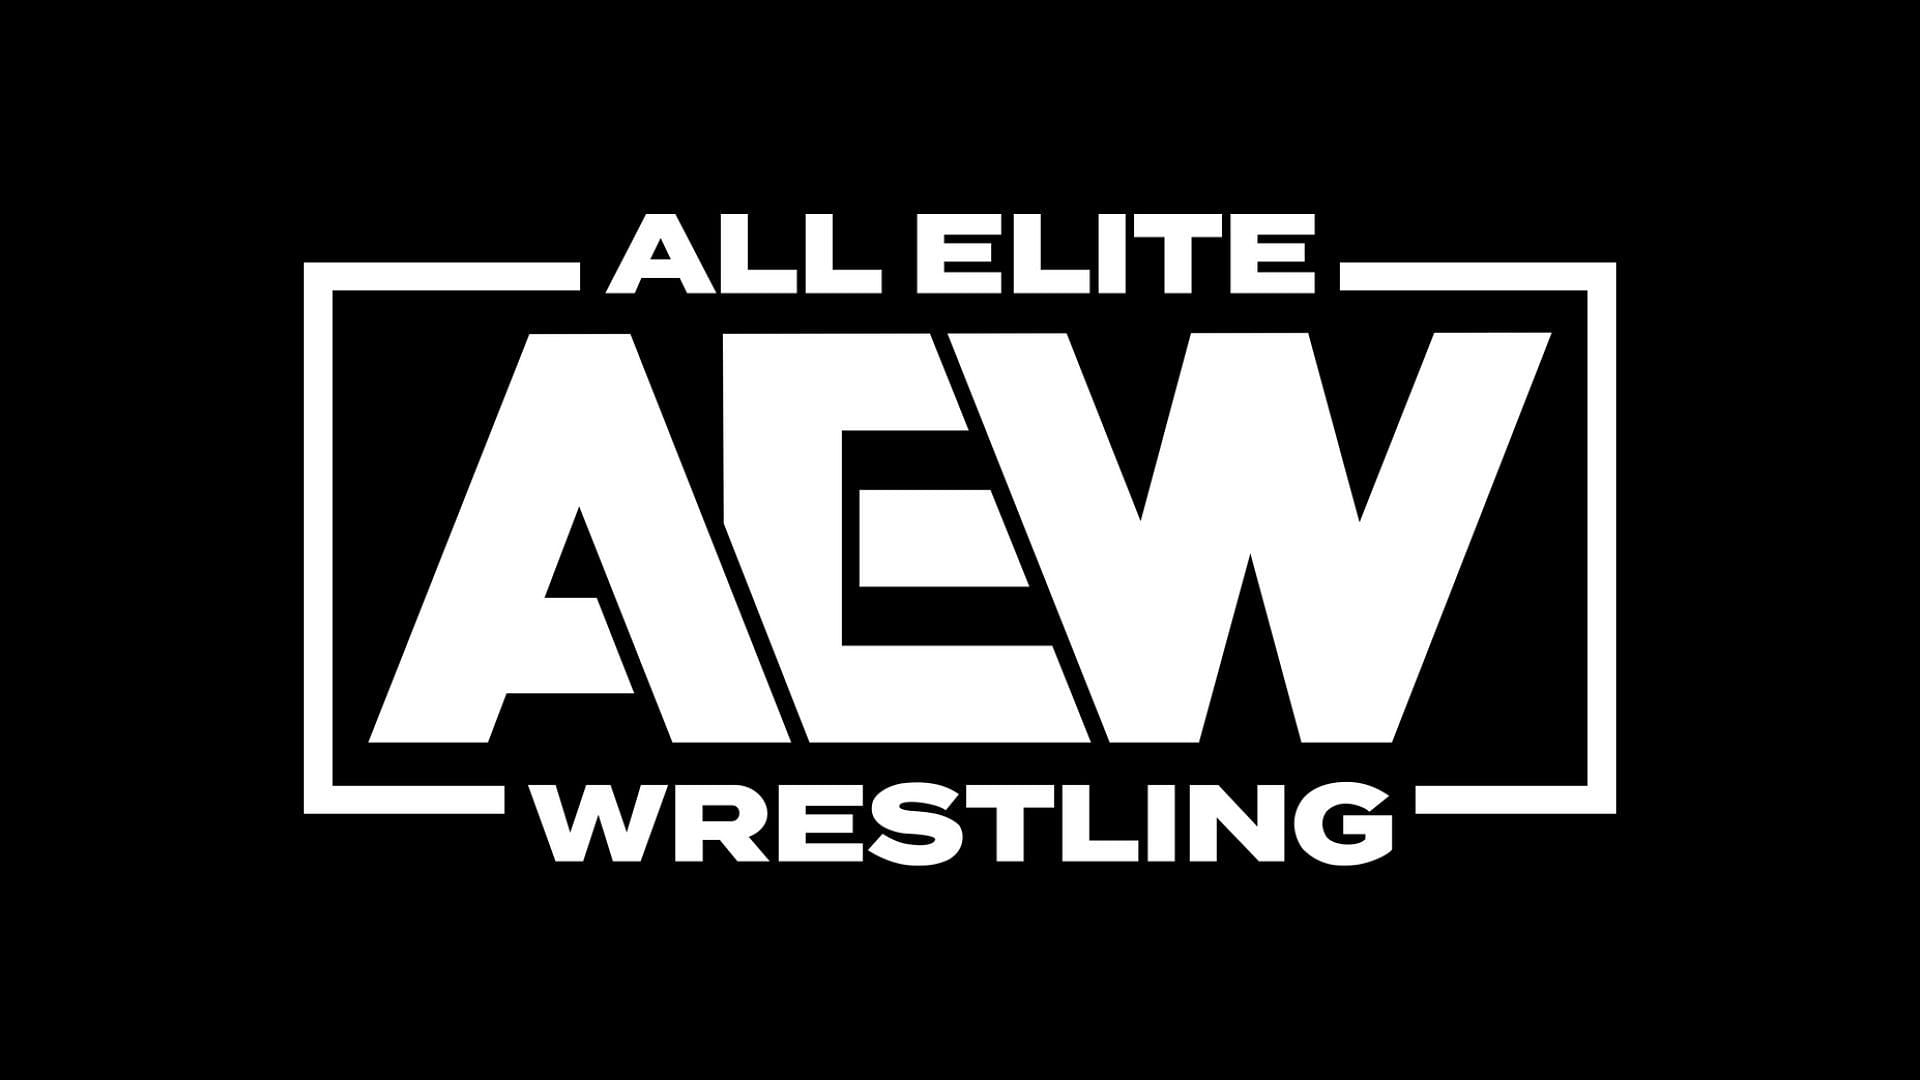 Is this star planning to return to AEW soon?